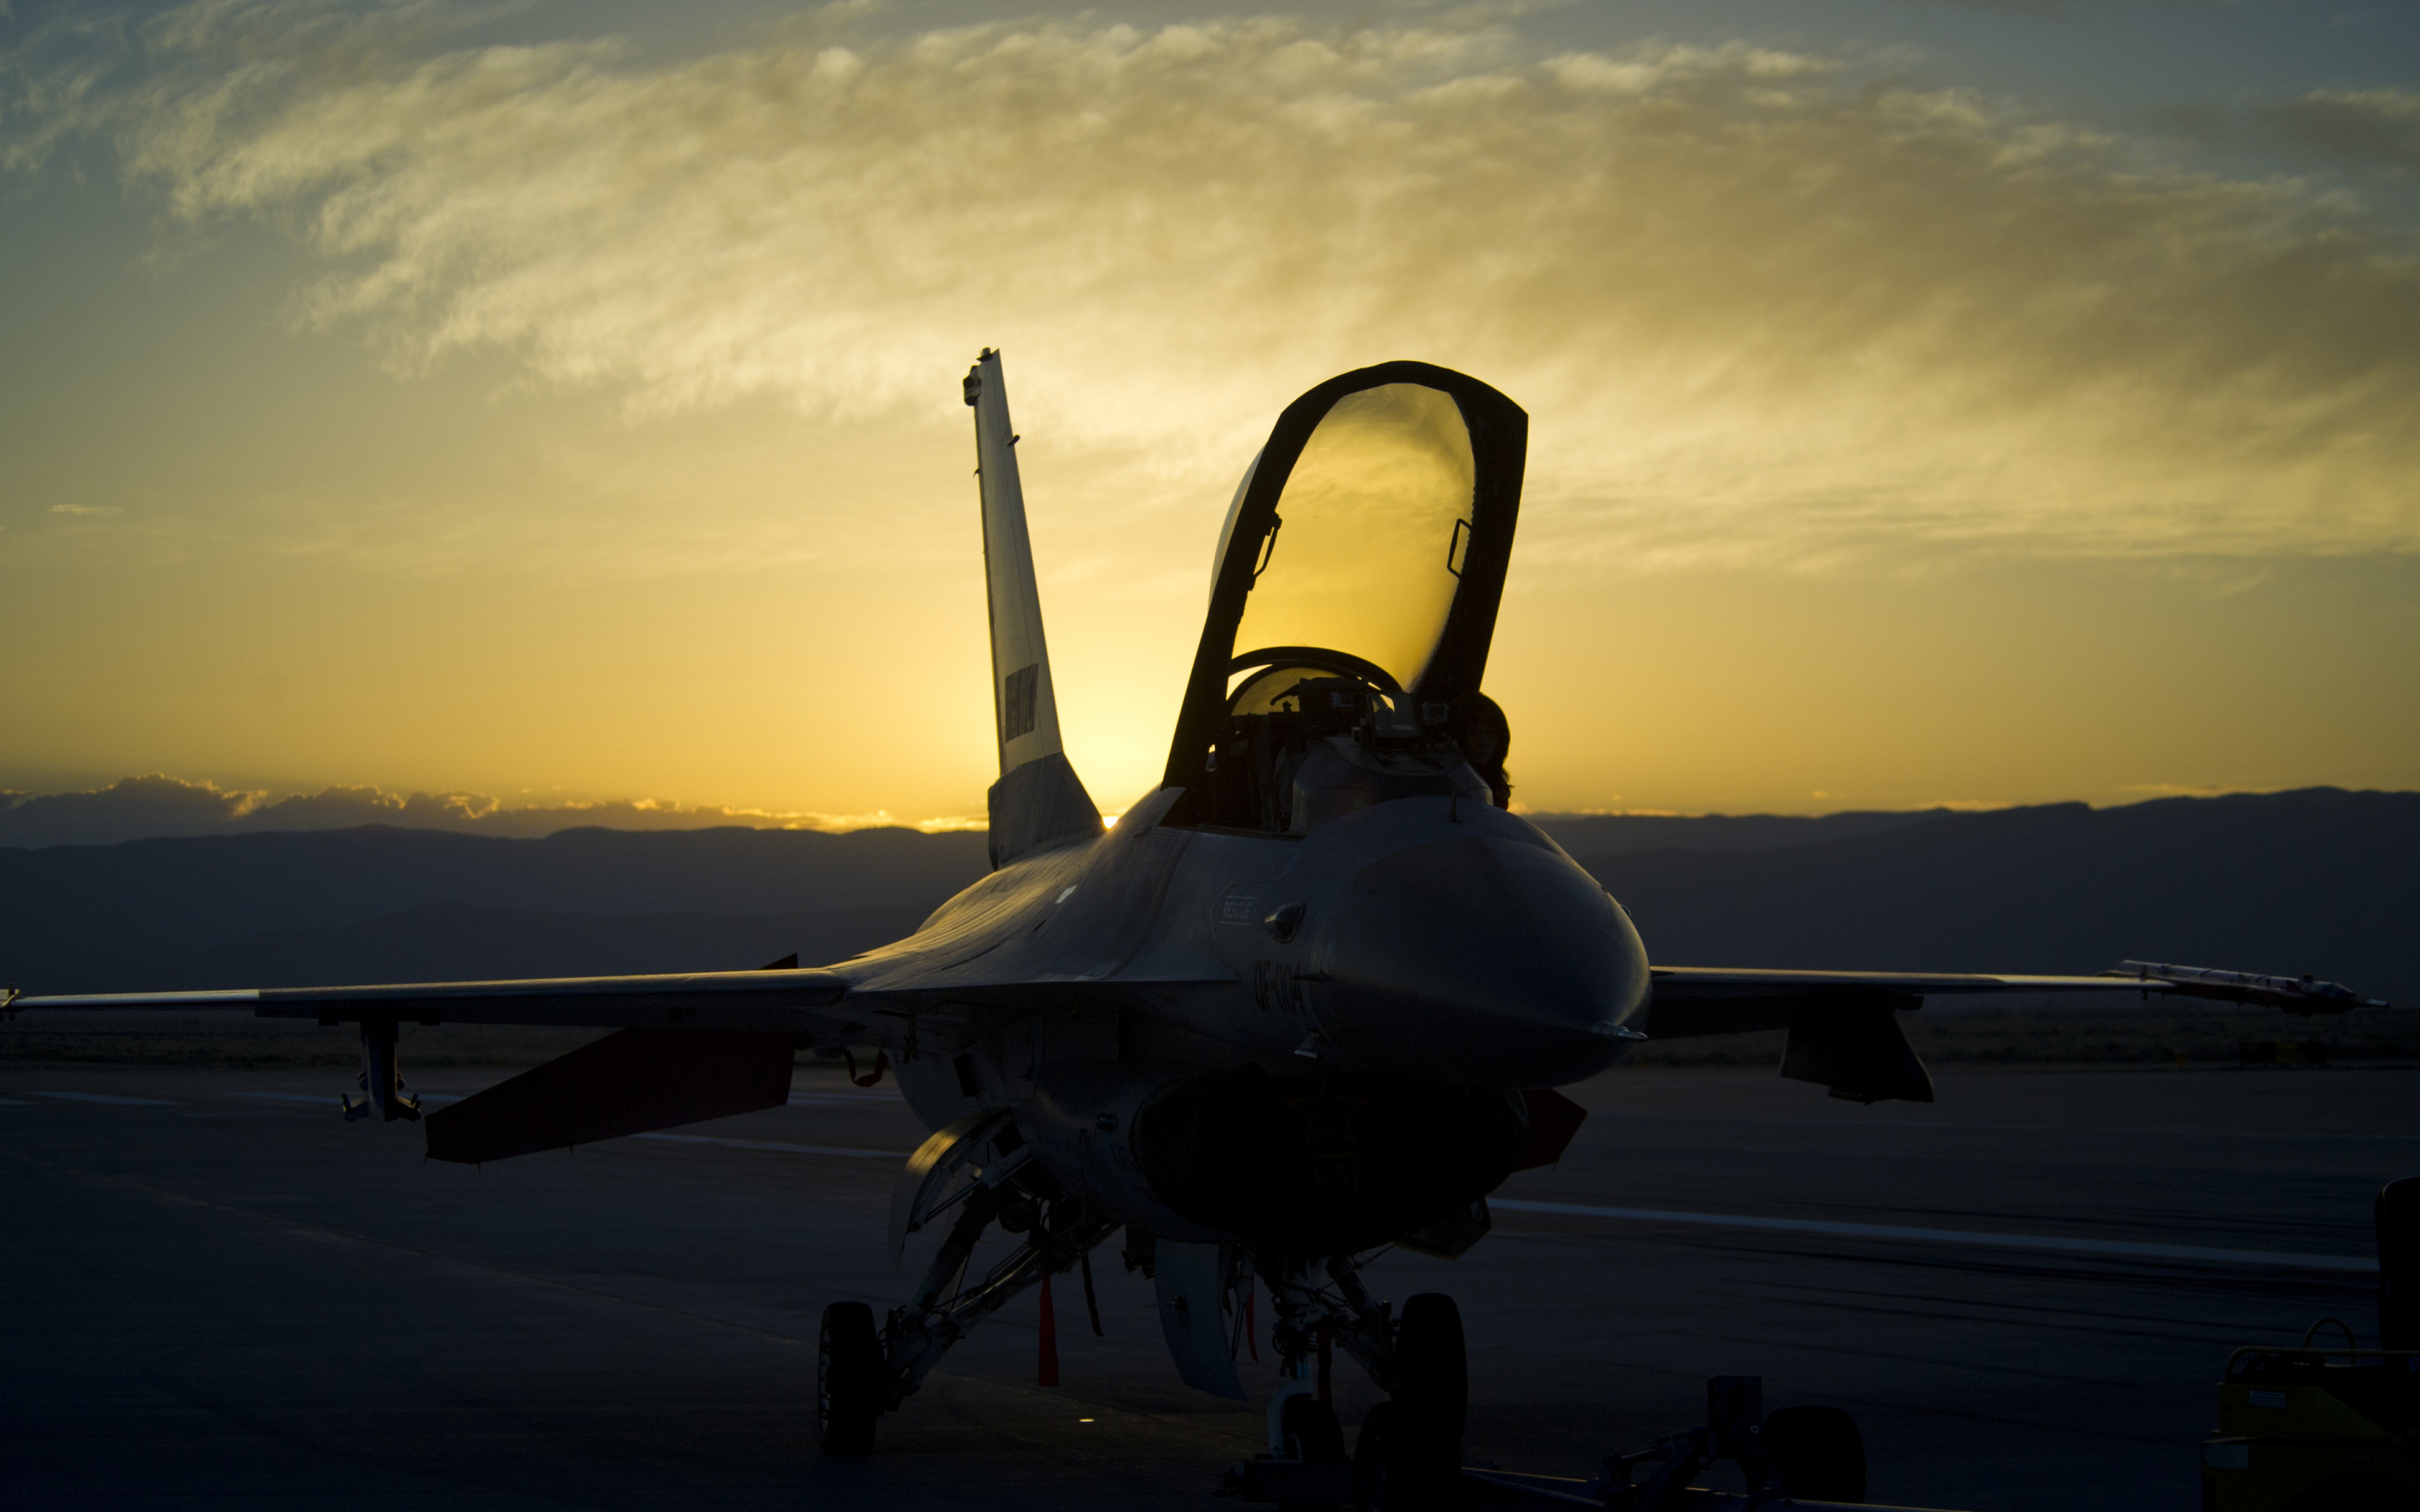 Sunset, military, General Dynamics F-16 Fighting Falcon, fighter aircraft, 2880x1800 wallpaper